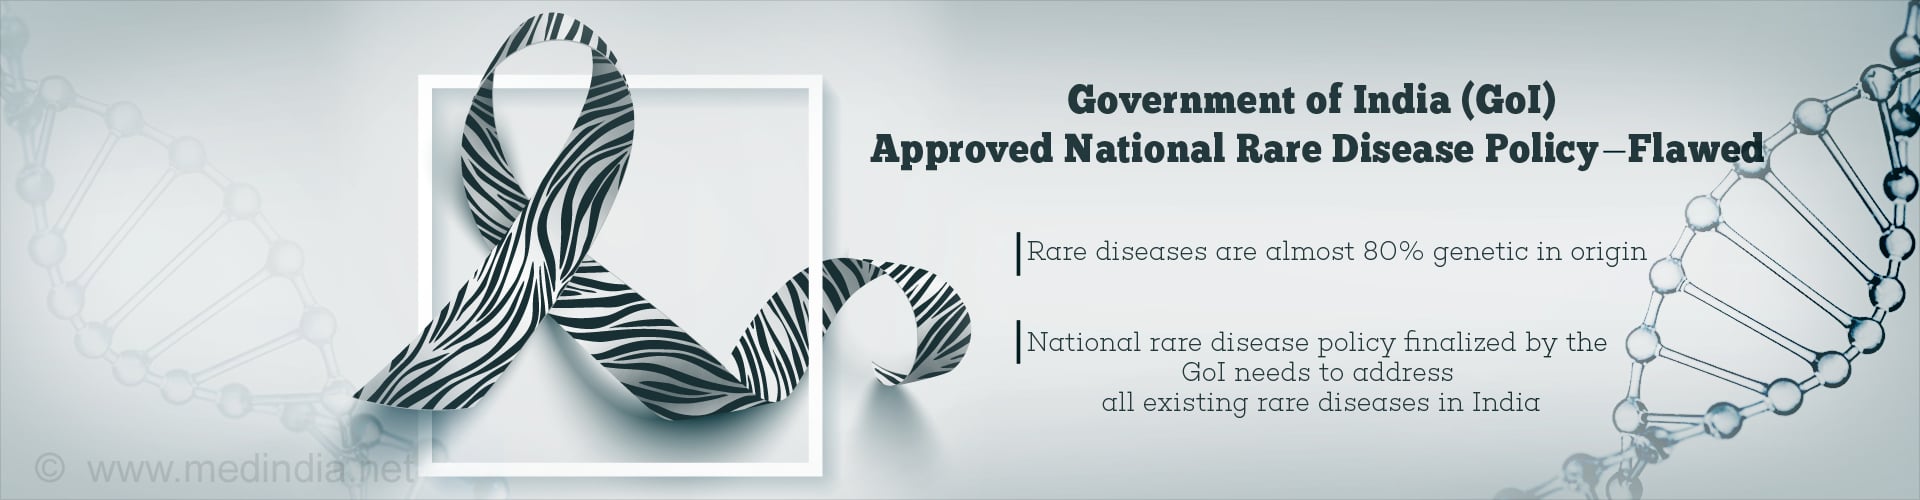 Government of India (GoI) Approved National Rare Disease Policy - Flawed
- Rare diseases are almost 80% genetic in origin
- National rare disease policy finalized by the GoI needs to address all existing rare diseases in India